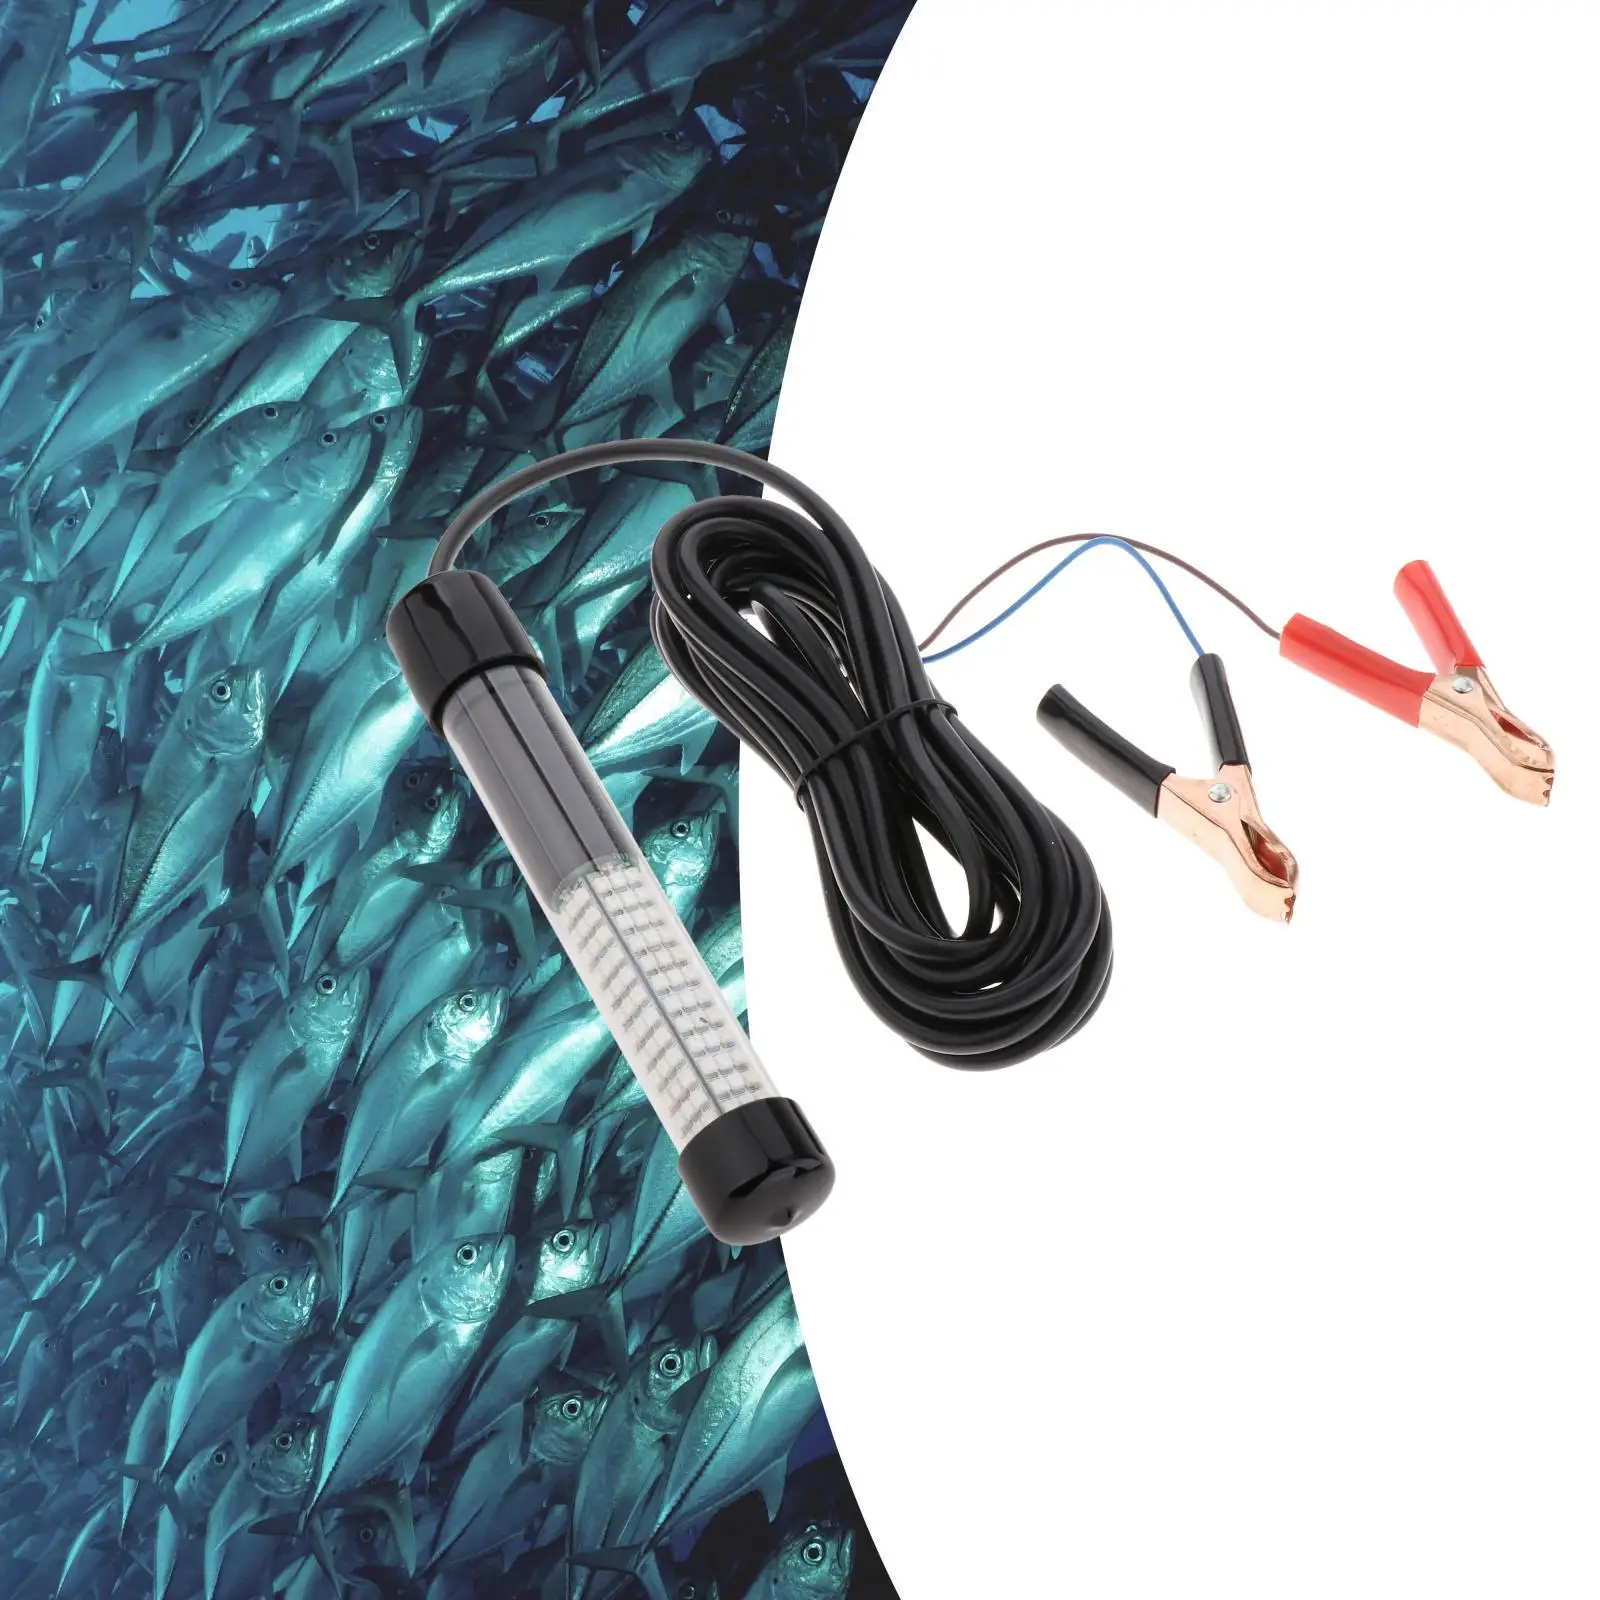 Submersible Fishing Light Water with 5M Cord Clip Super Bright Outdoor Night Fishing Finder for Freshwater Fishing